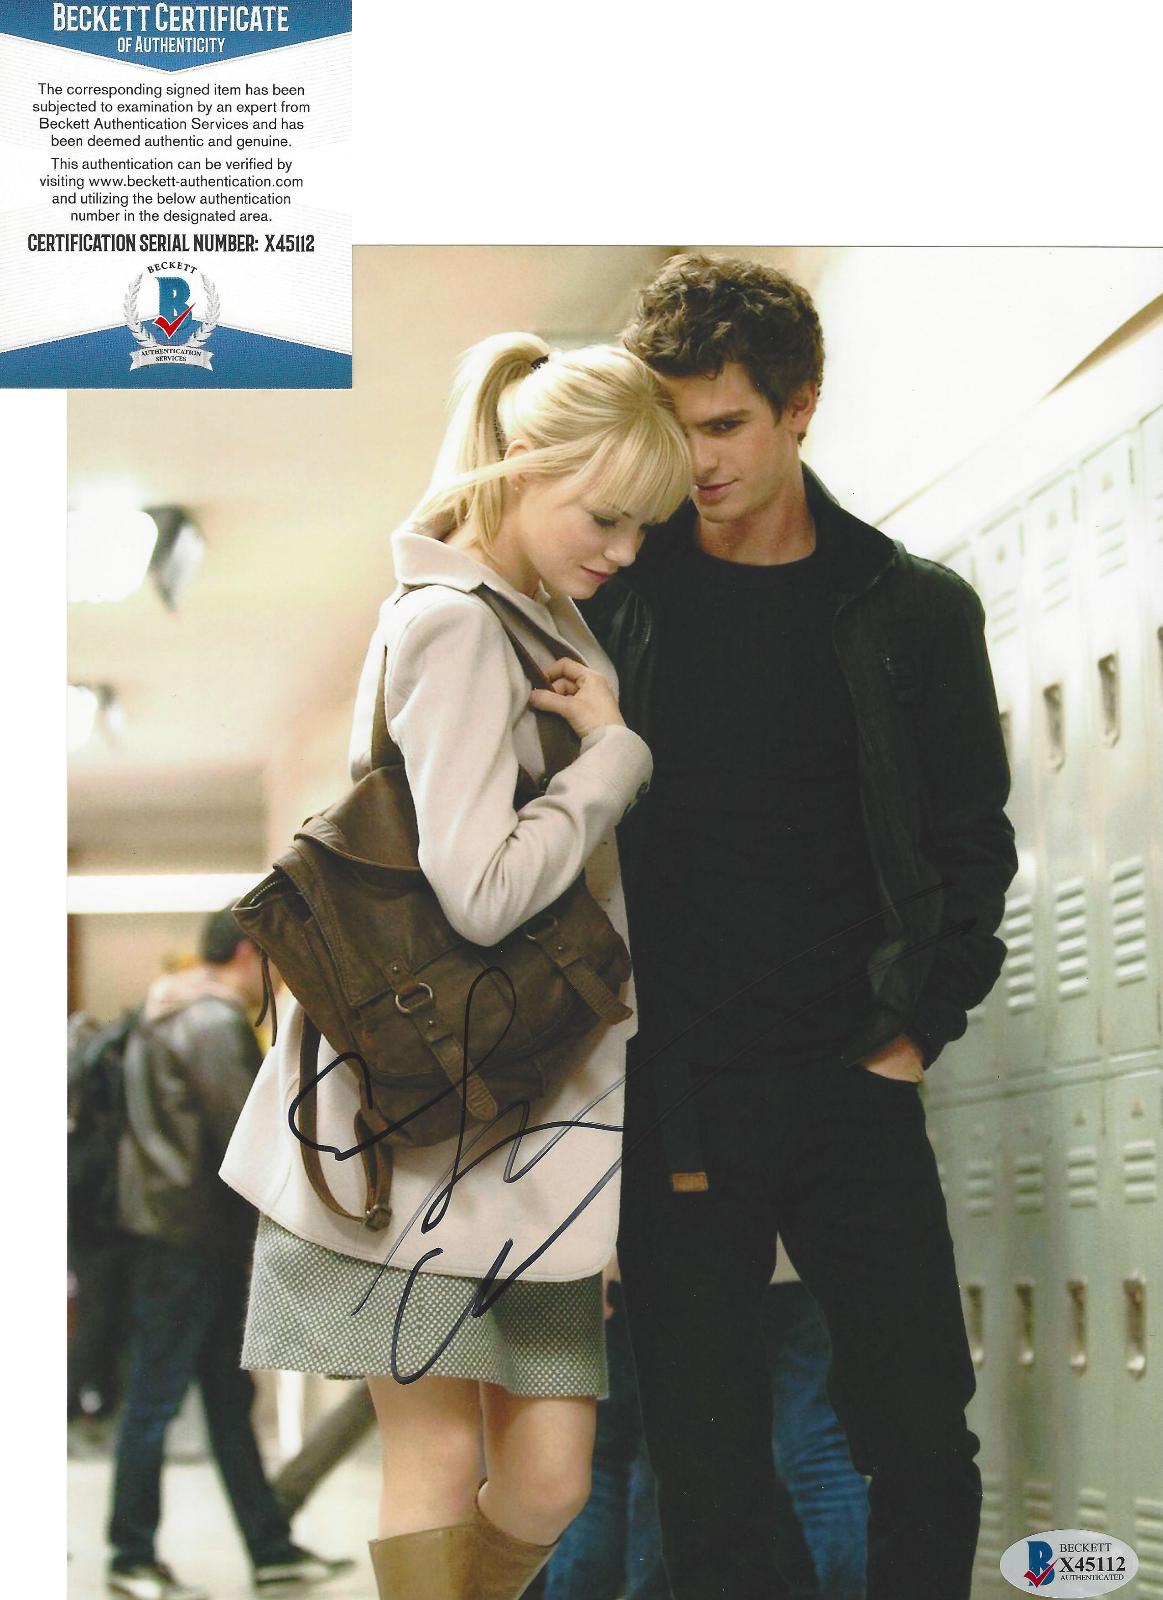 EMMA STONE & ANDREW GARFIELD SIGNED SPIDER-MAN SIGNED 8x10 Photo Poster painting BECKETT COA BAS